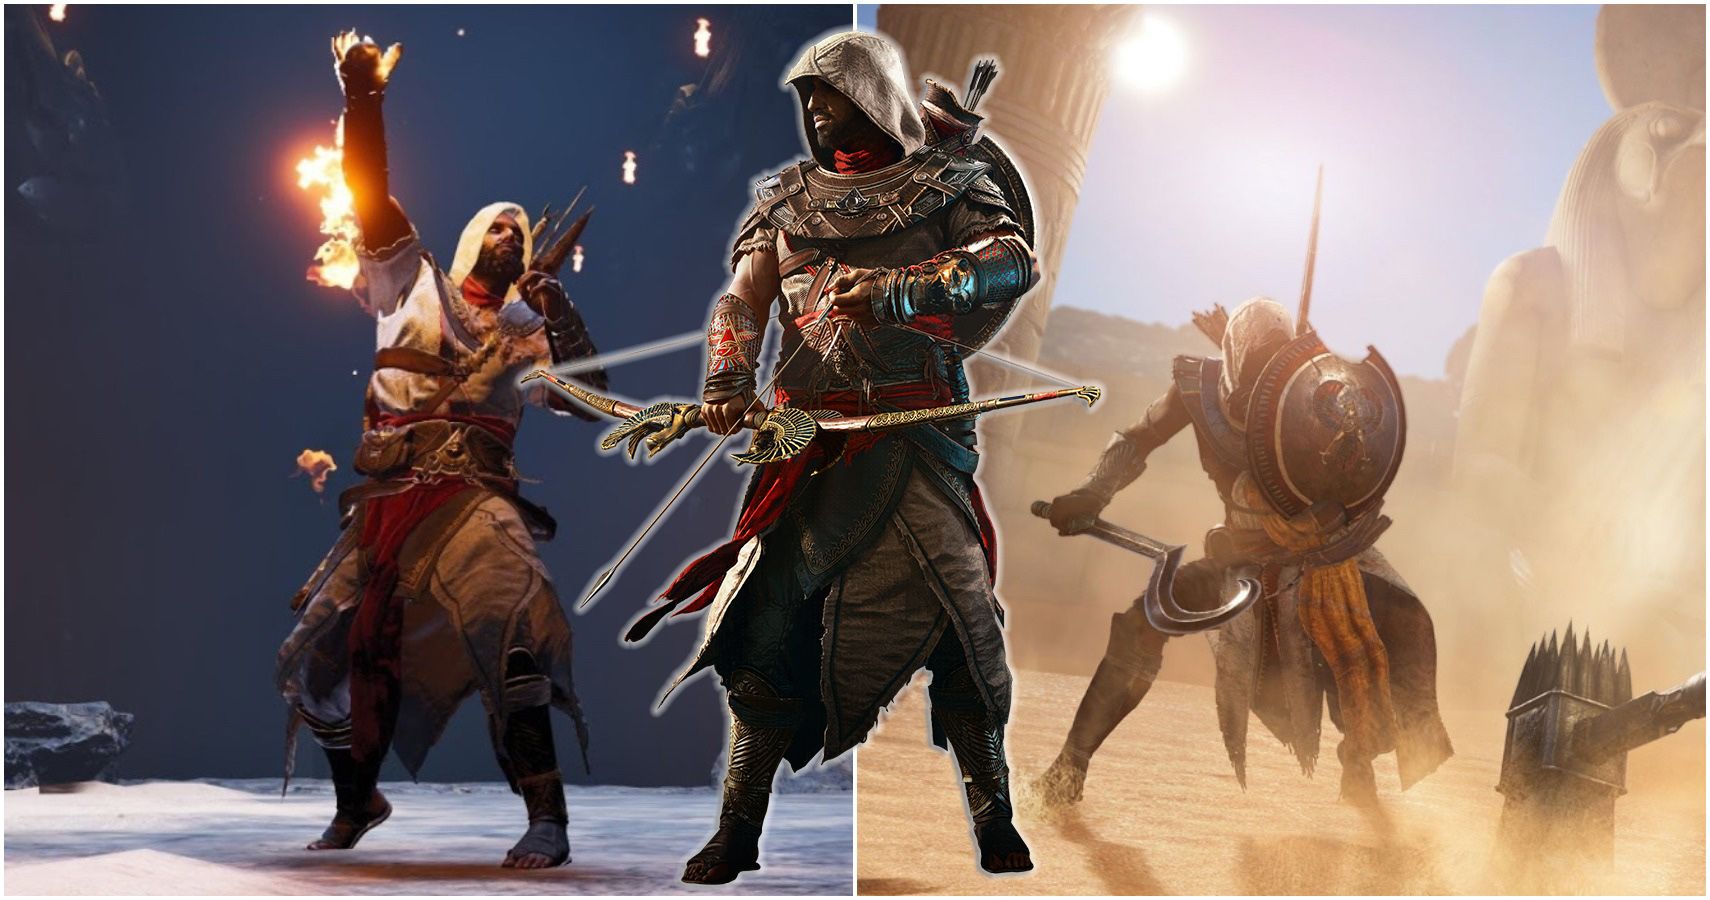 linkage vitamin Book 15 Best Weapons in Assassin's Creed Origins, Ranked